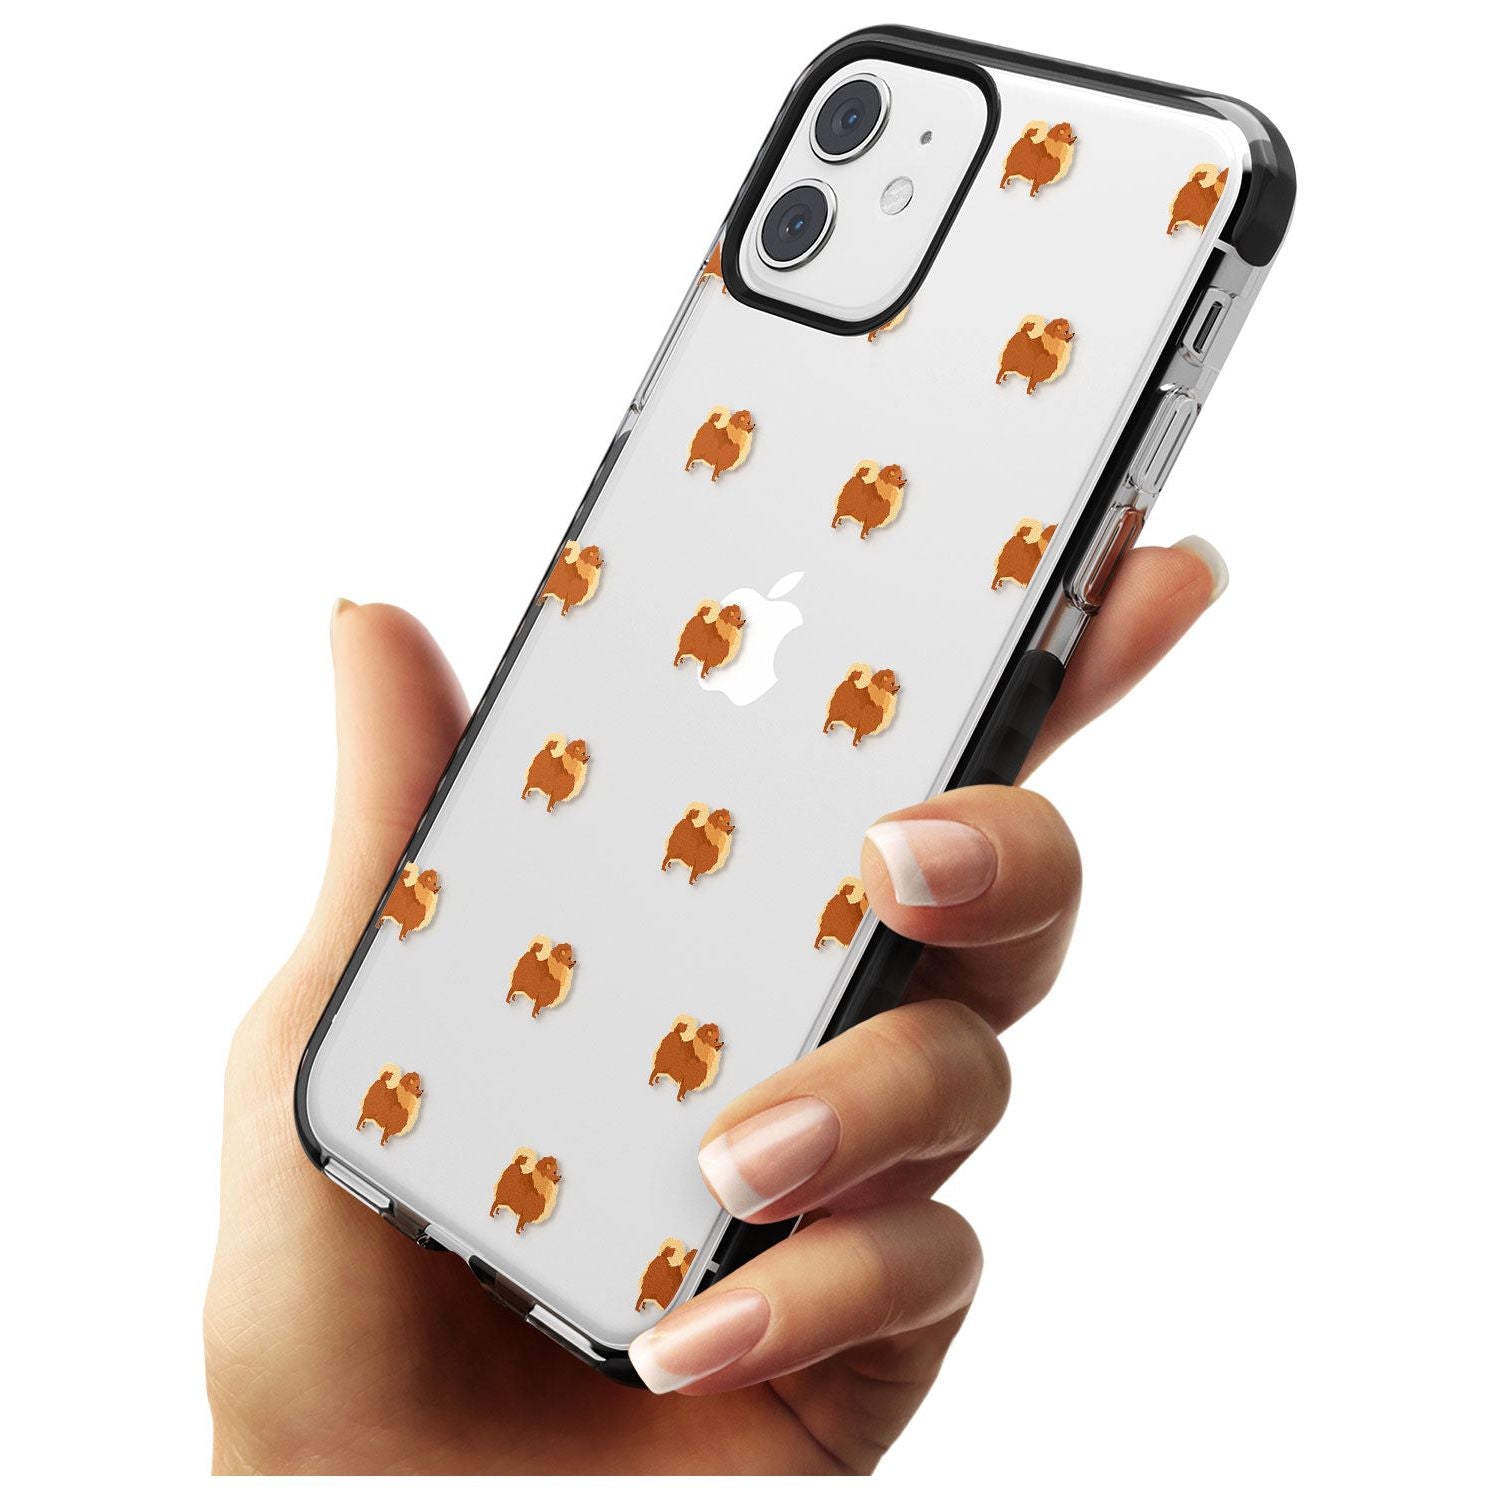 Pomeranian Dog Pattern Clear Black Impact Phone Case for iPhone 11